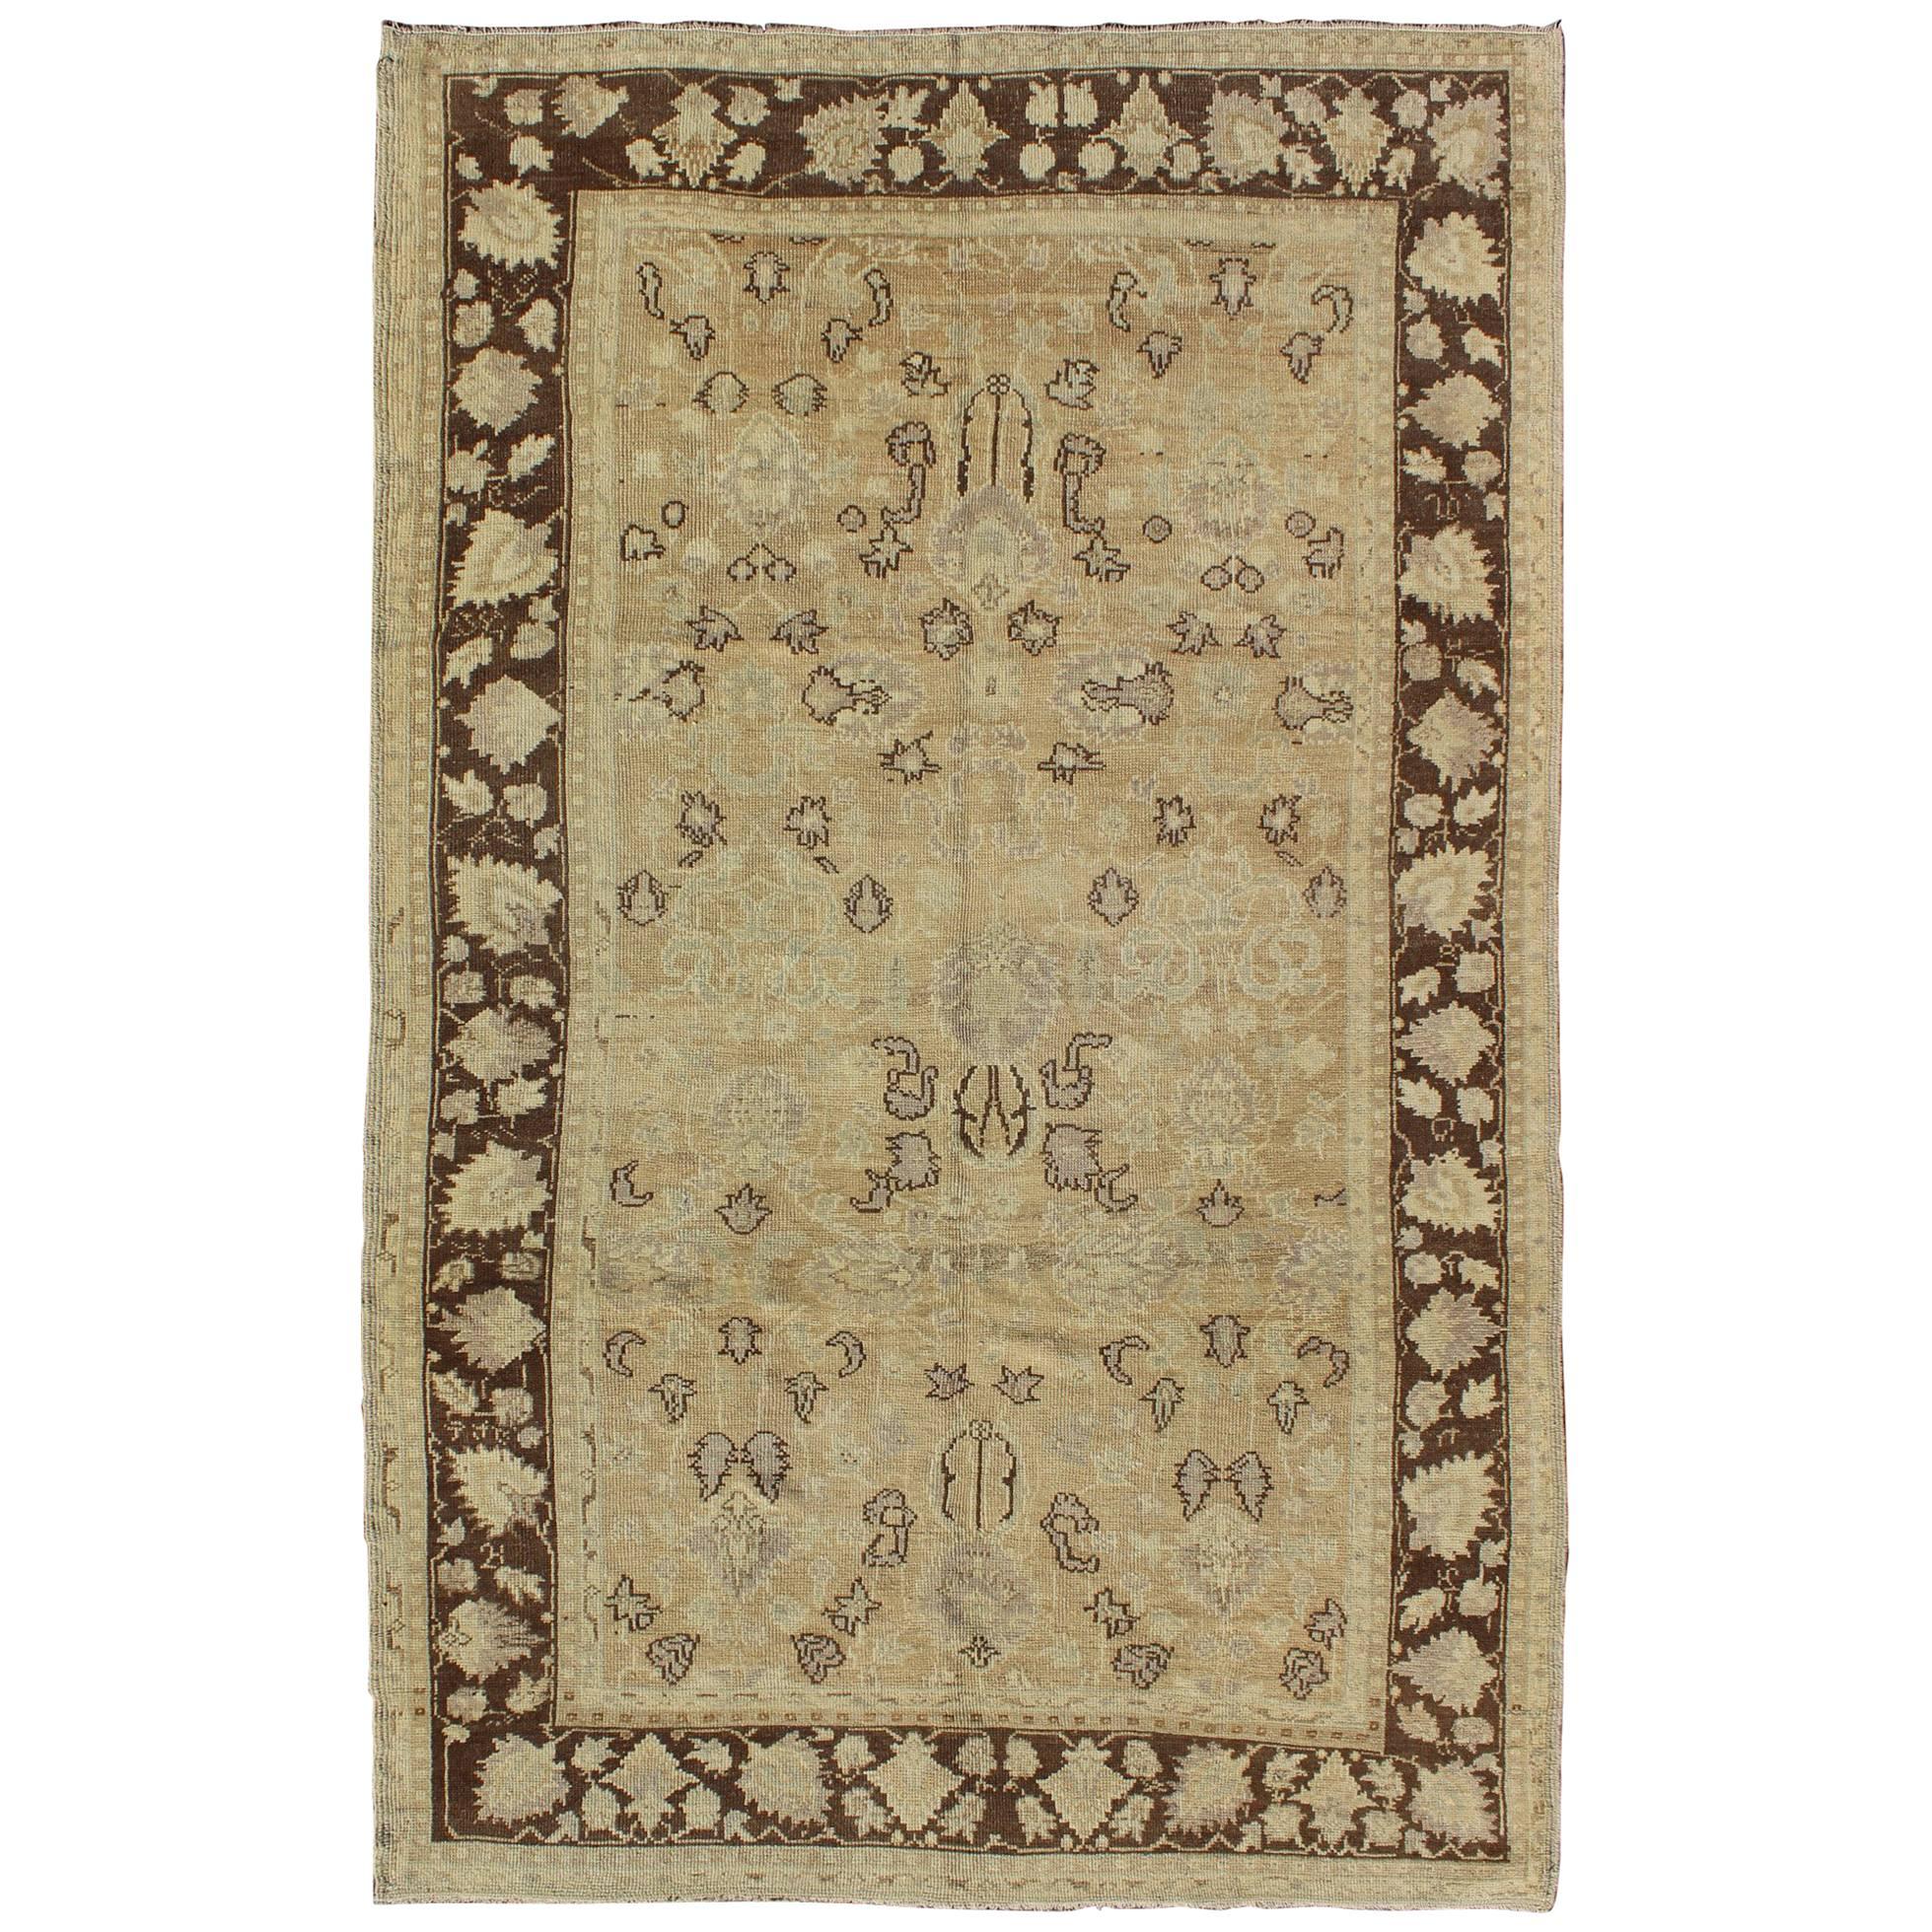 All-Over Design Turkish Oushak Vintage Rug in Earth Colors, Tan, Cream, Brown